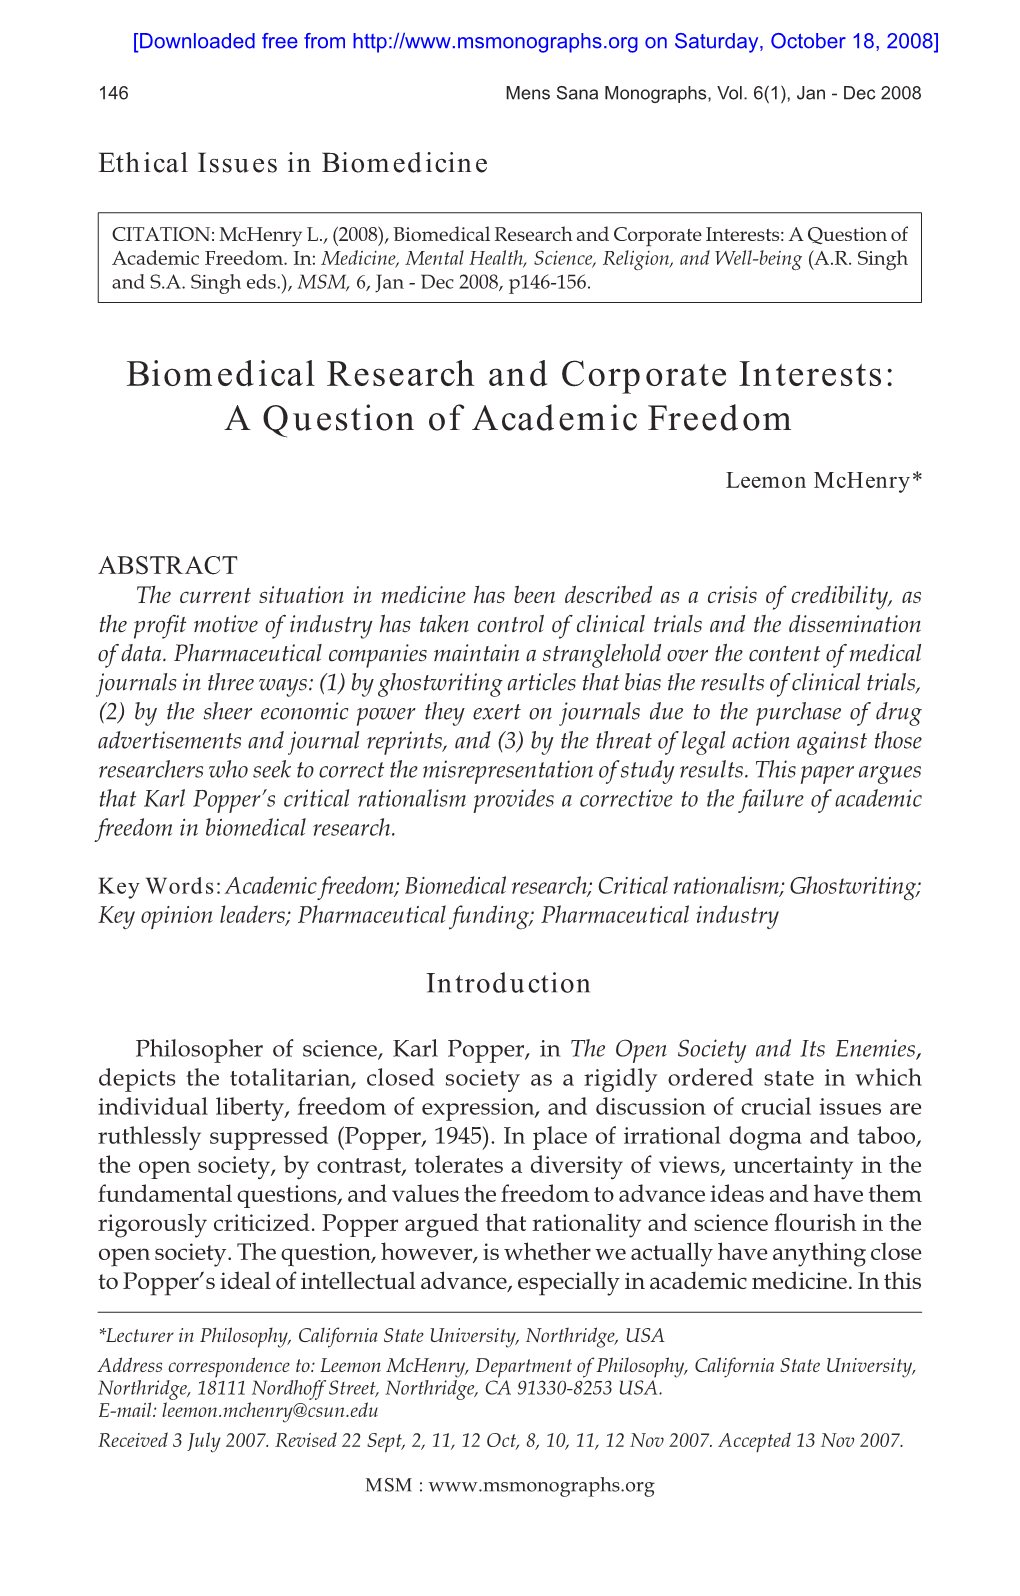 Biomedical Research and Corporate Interests: a Question of Academic Freedom